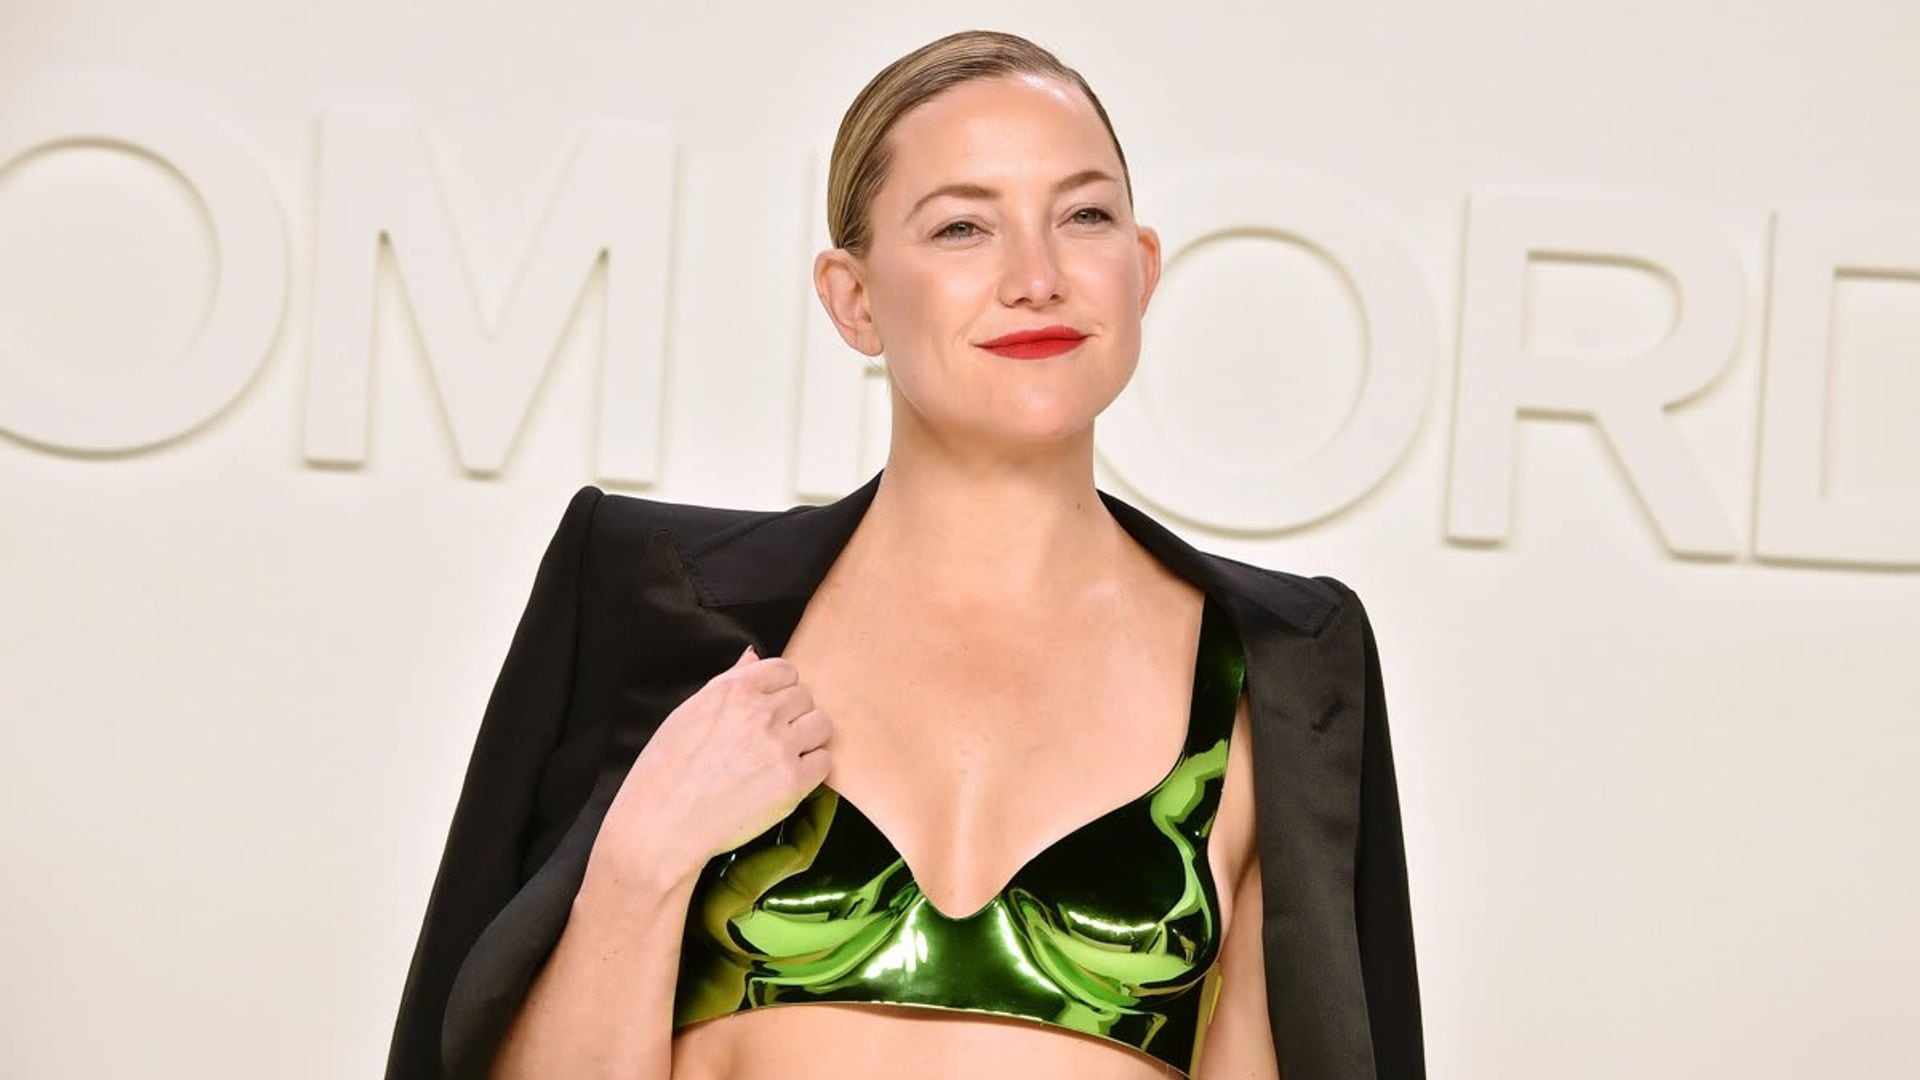 Kate Hudson opens up about difficult family issues